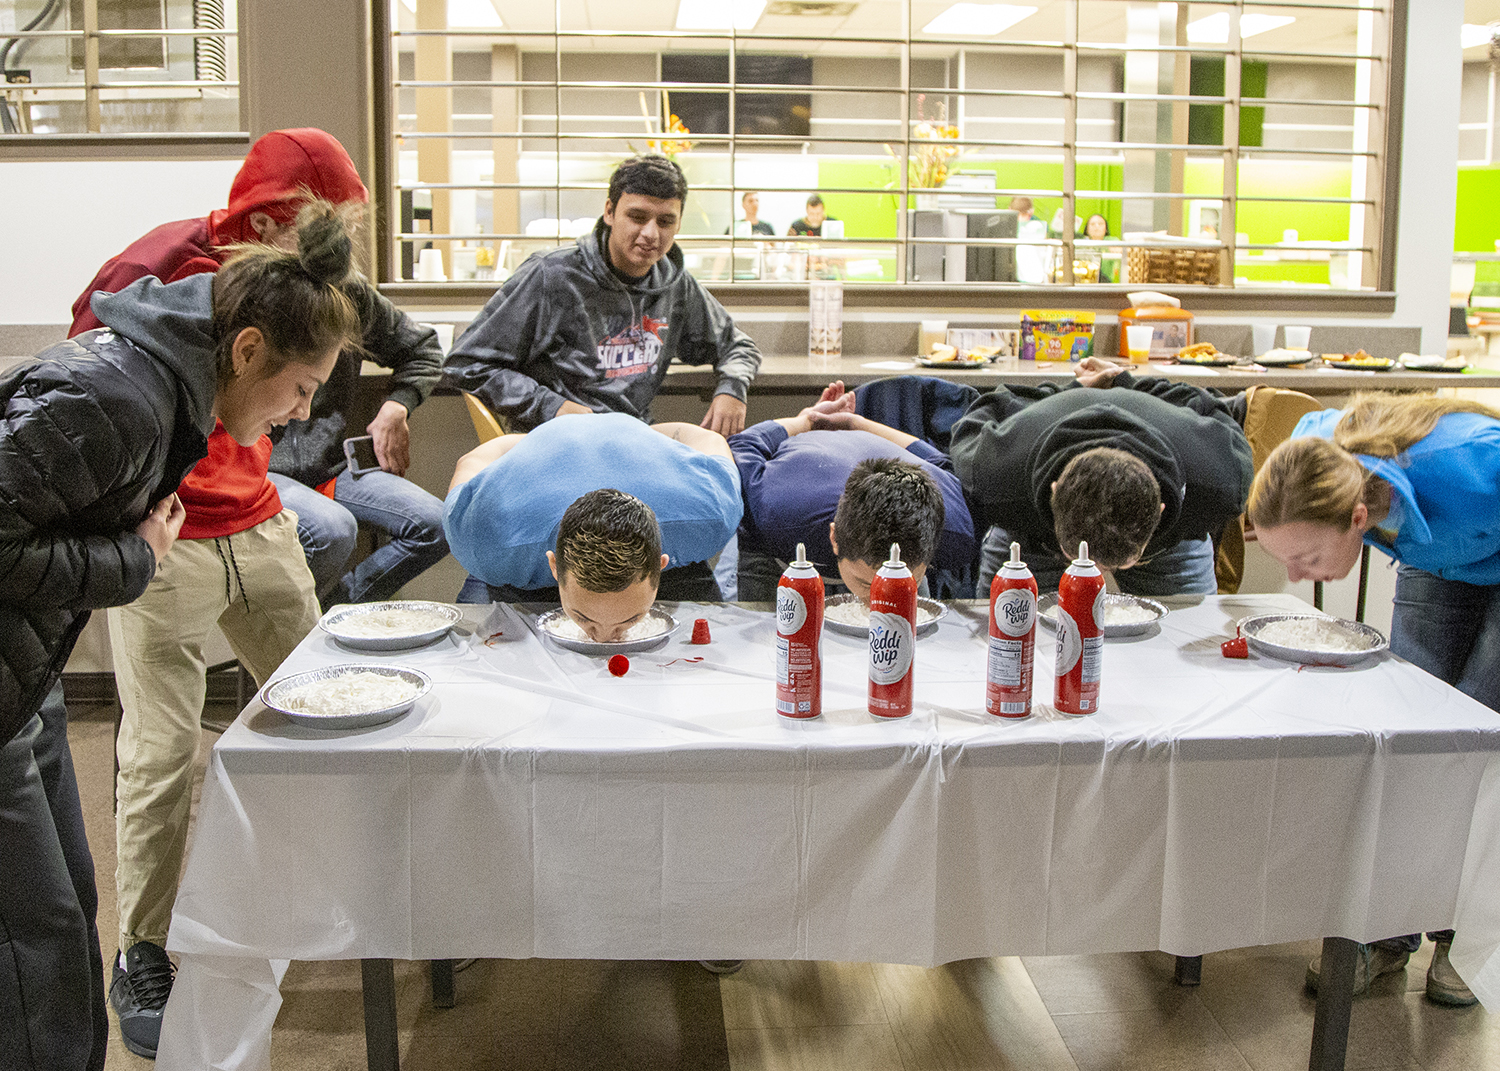 Students competing in a pie eating contest